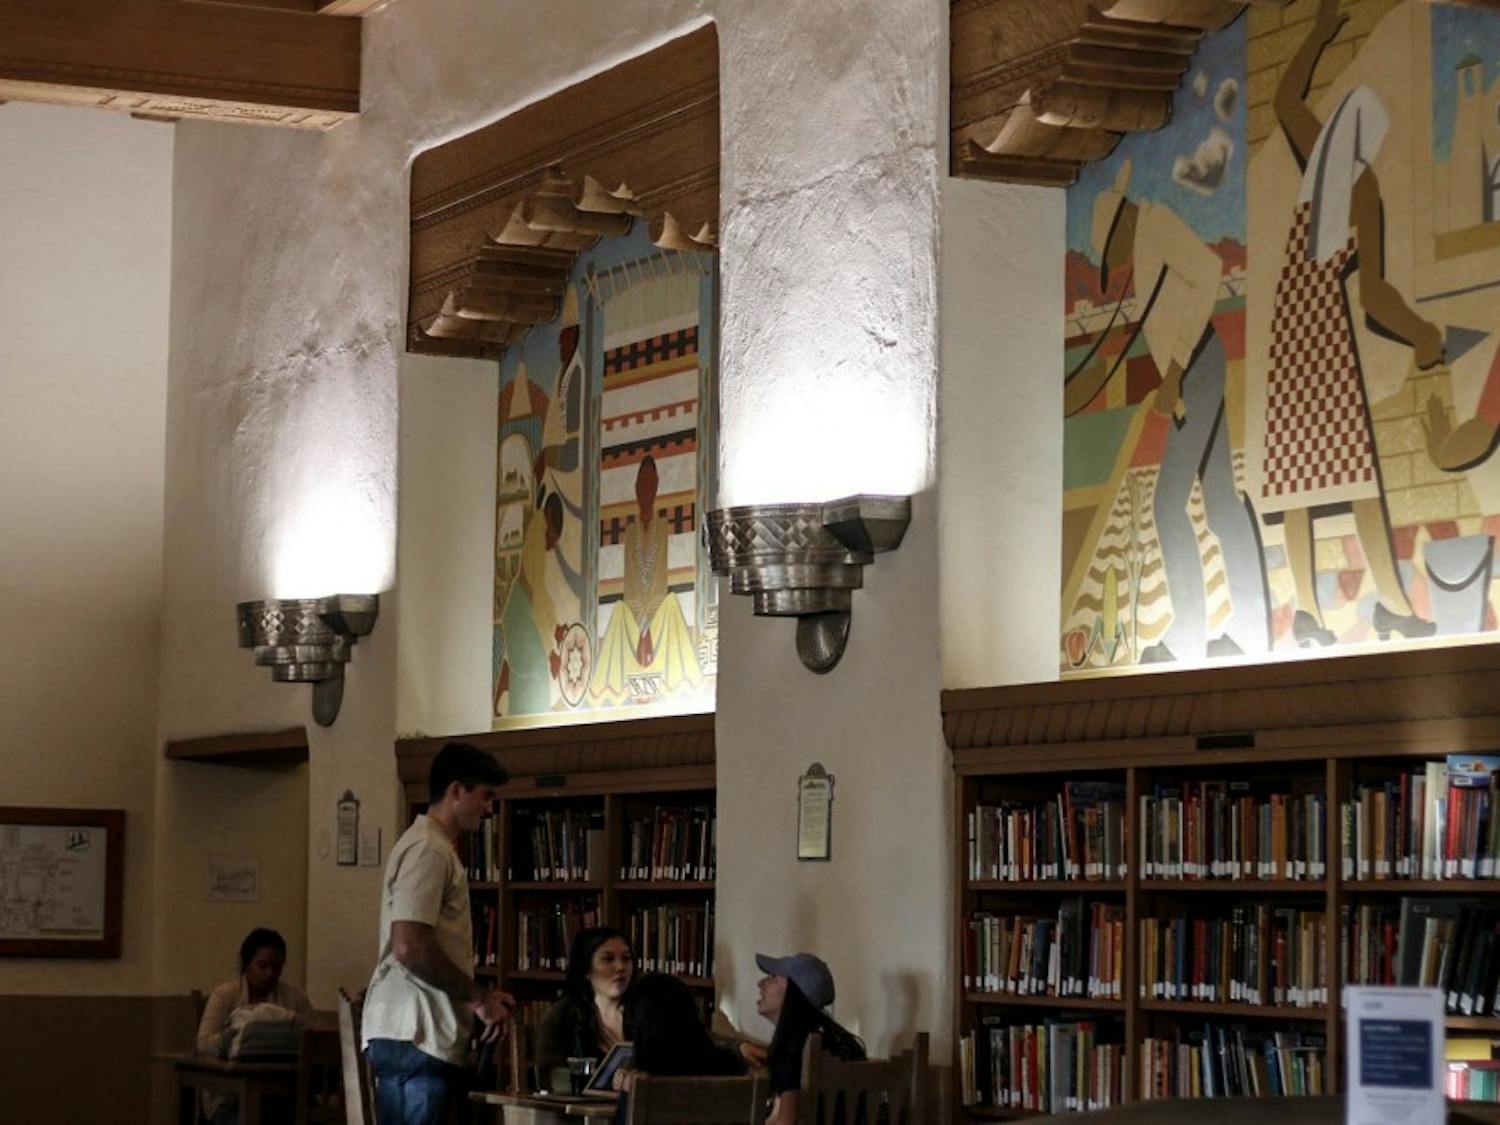 The&nbsp;“Three Peoples Murals” are located in the west wing of Zimmerman Library.  The murals include four different paintings created in 1939 by Kenneth Adams.